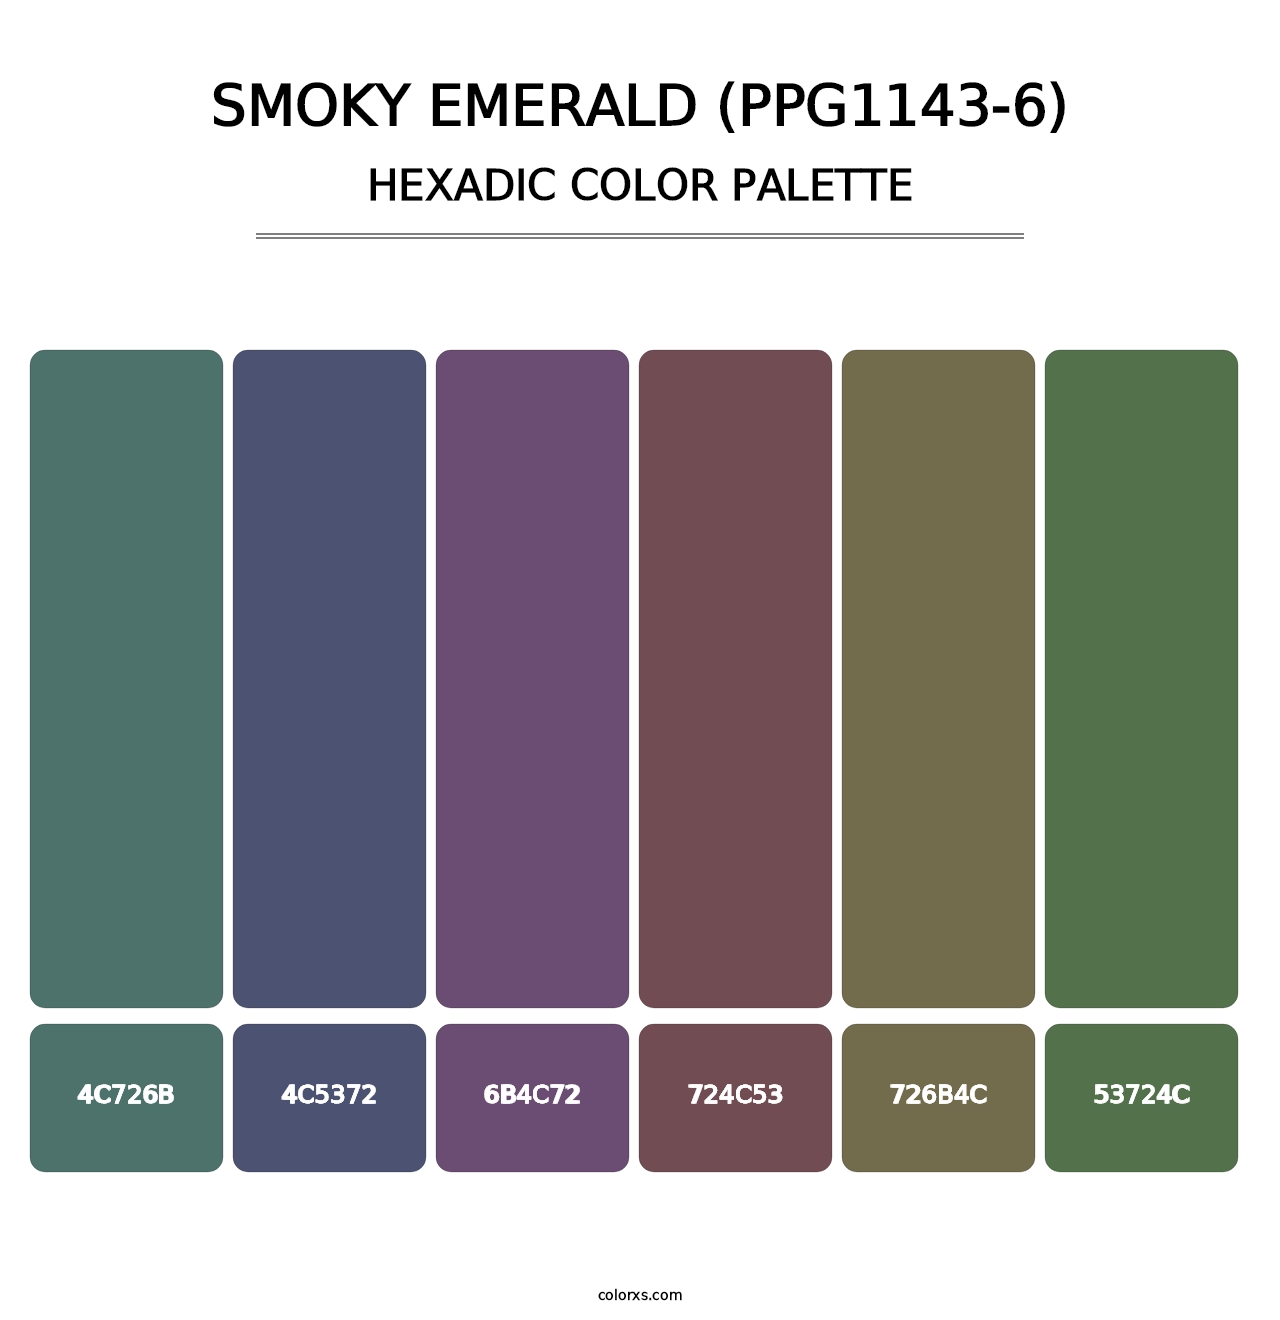 Smoky Emerald (PPG1143-6) - Hexadic Color Palette